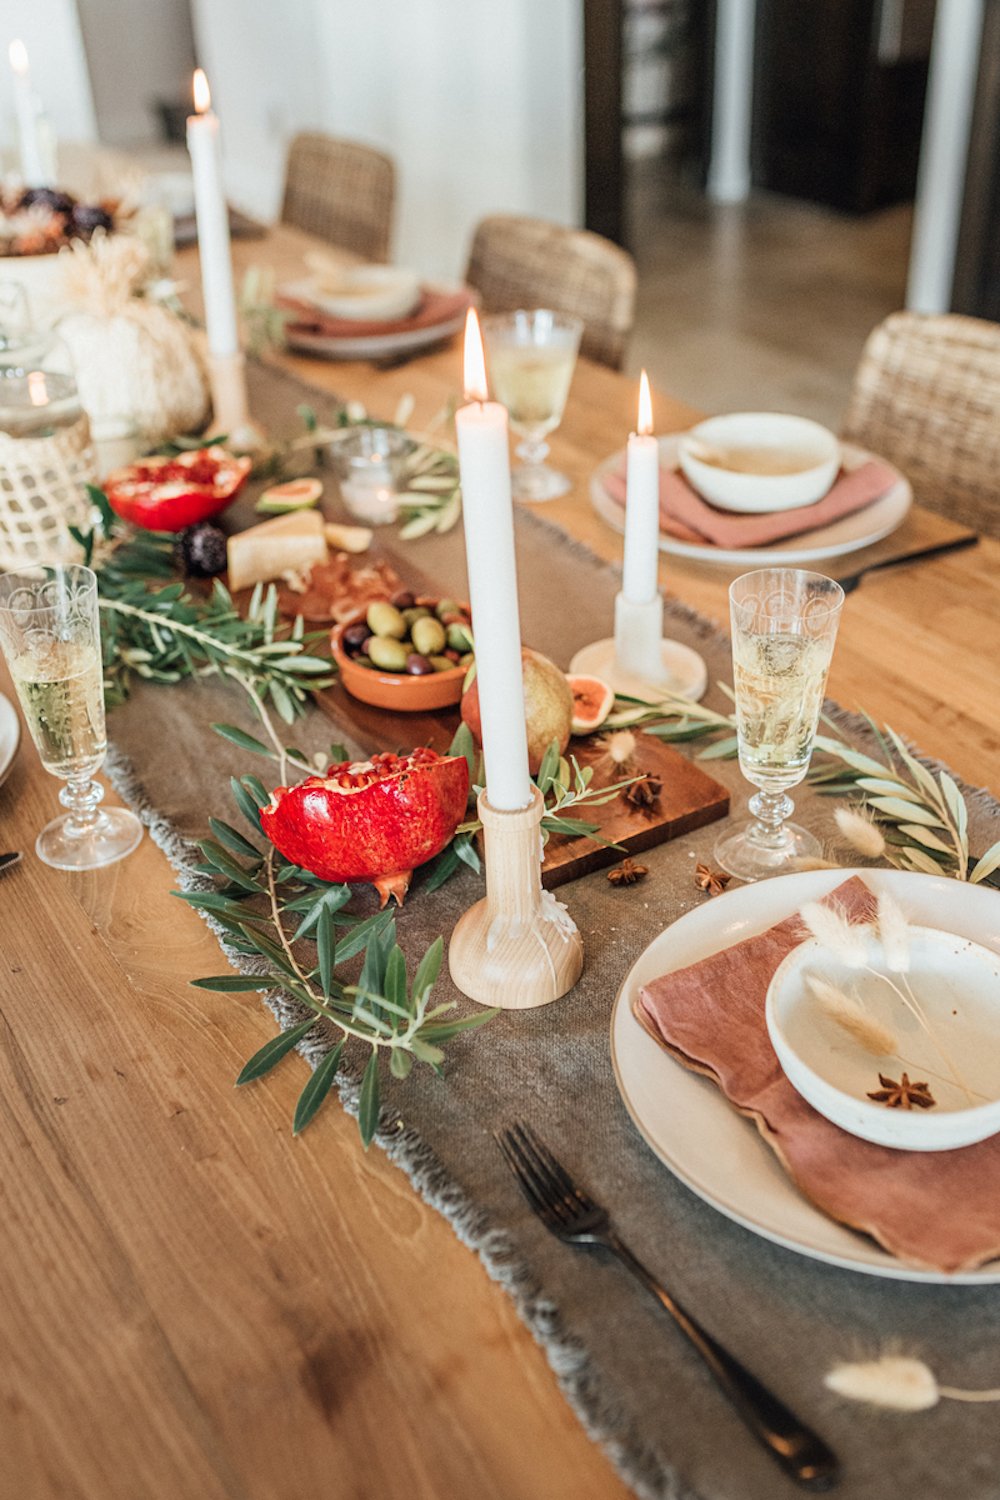 Thanksgiving table setting ideas with dark gray table runner, white taper candles, fluted glassware, olive sprigs, and neutral dinnerware.